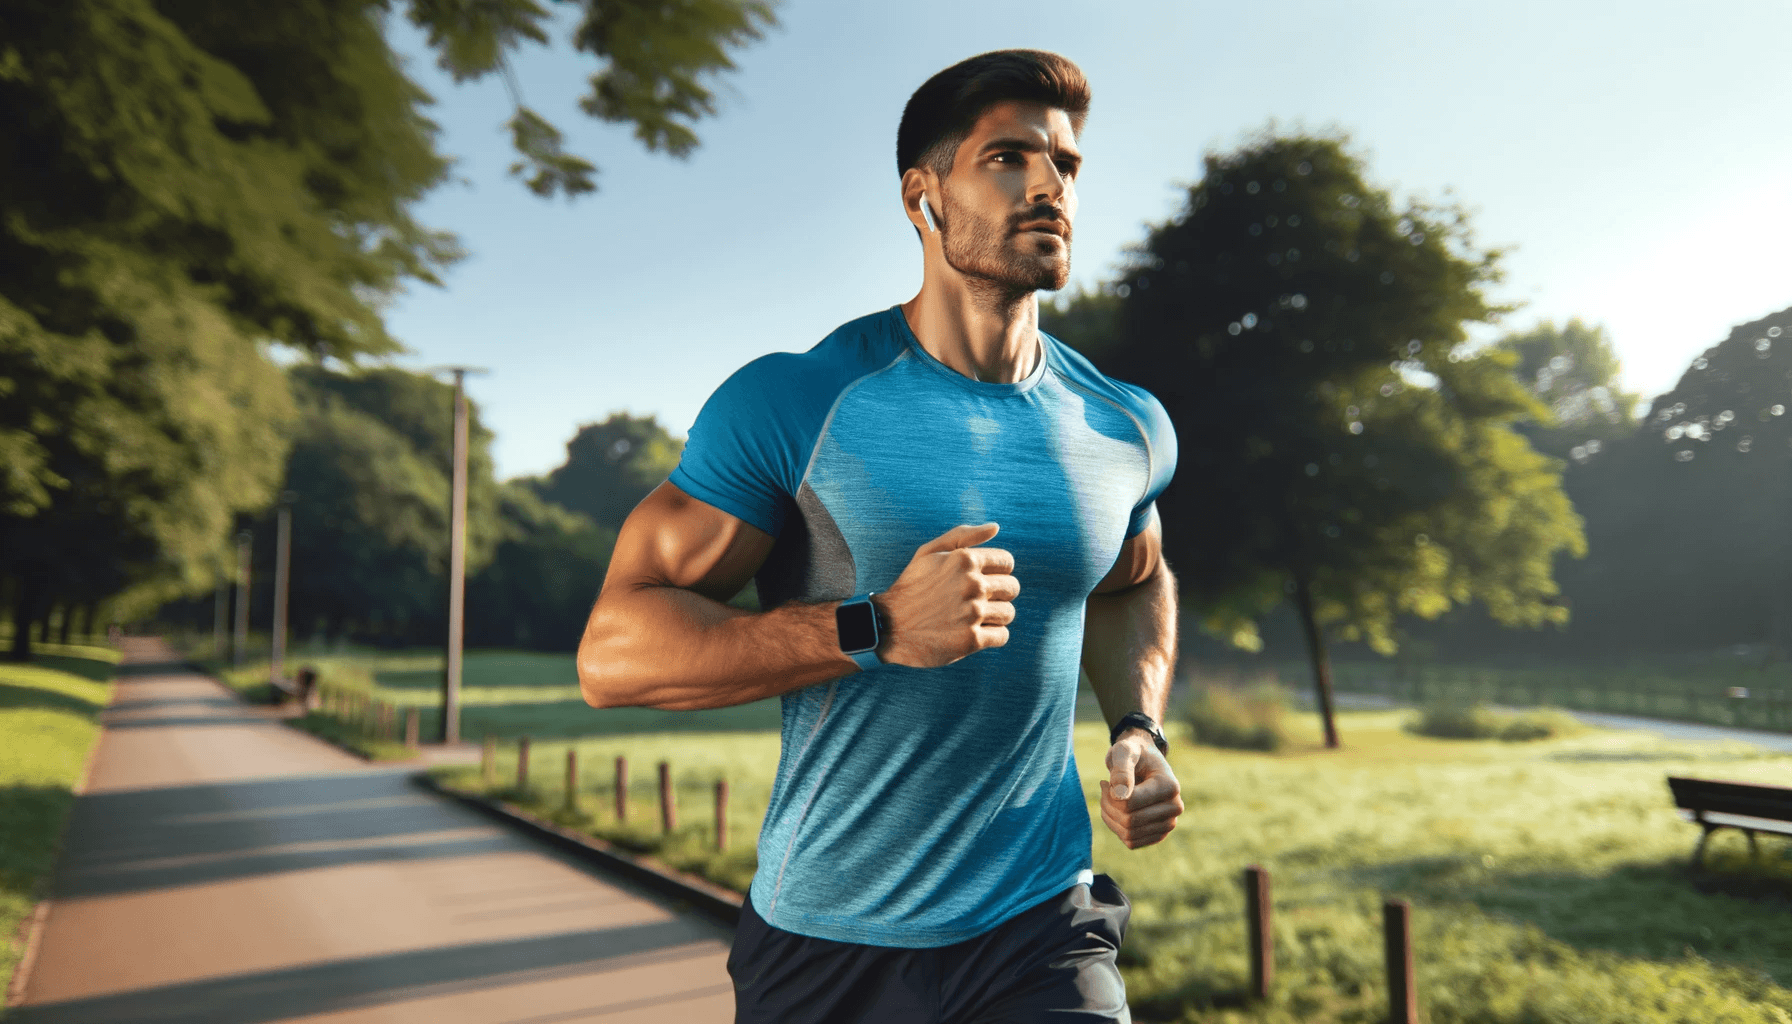 A well built man jogging in the park on a sunny morning. He is in mid stride with a focused expression wearing a bright blue t shirt and black shorts